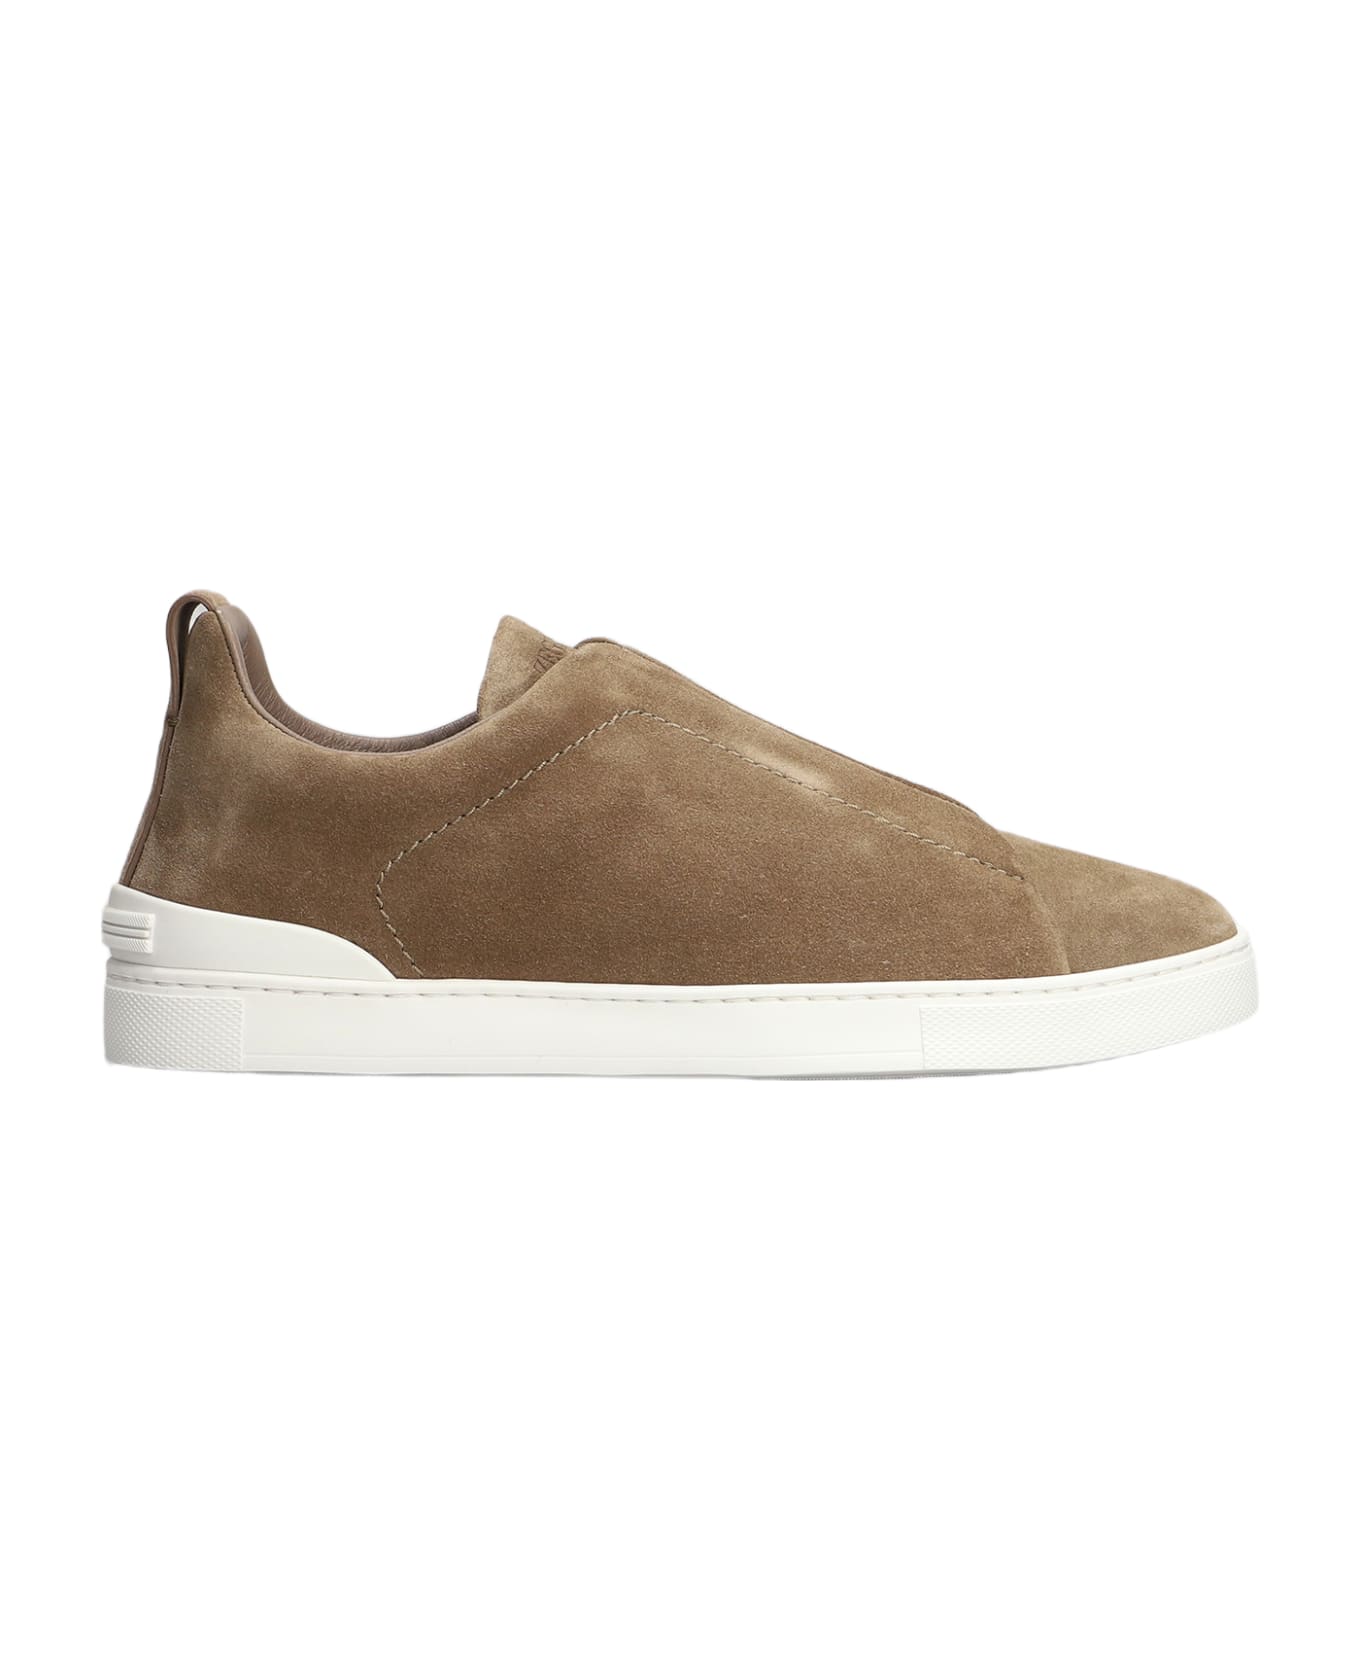 Zegna Triple Stich Sneakers In Camel Suede - Camel